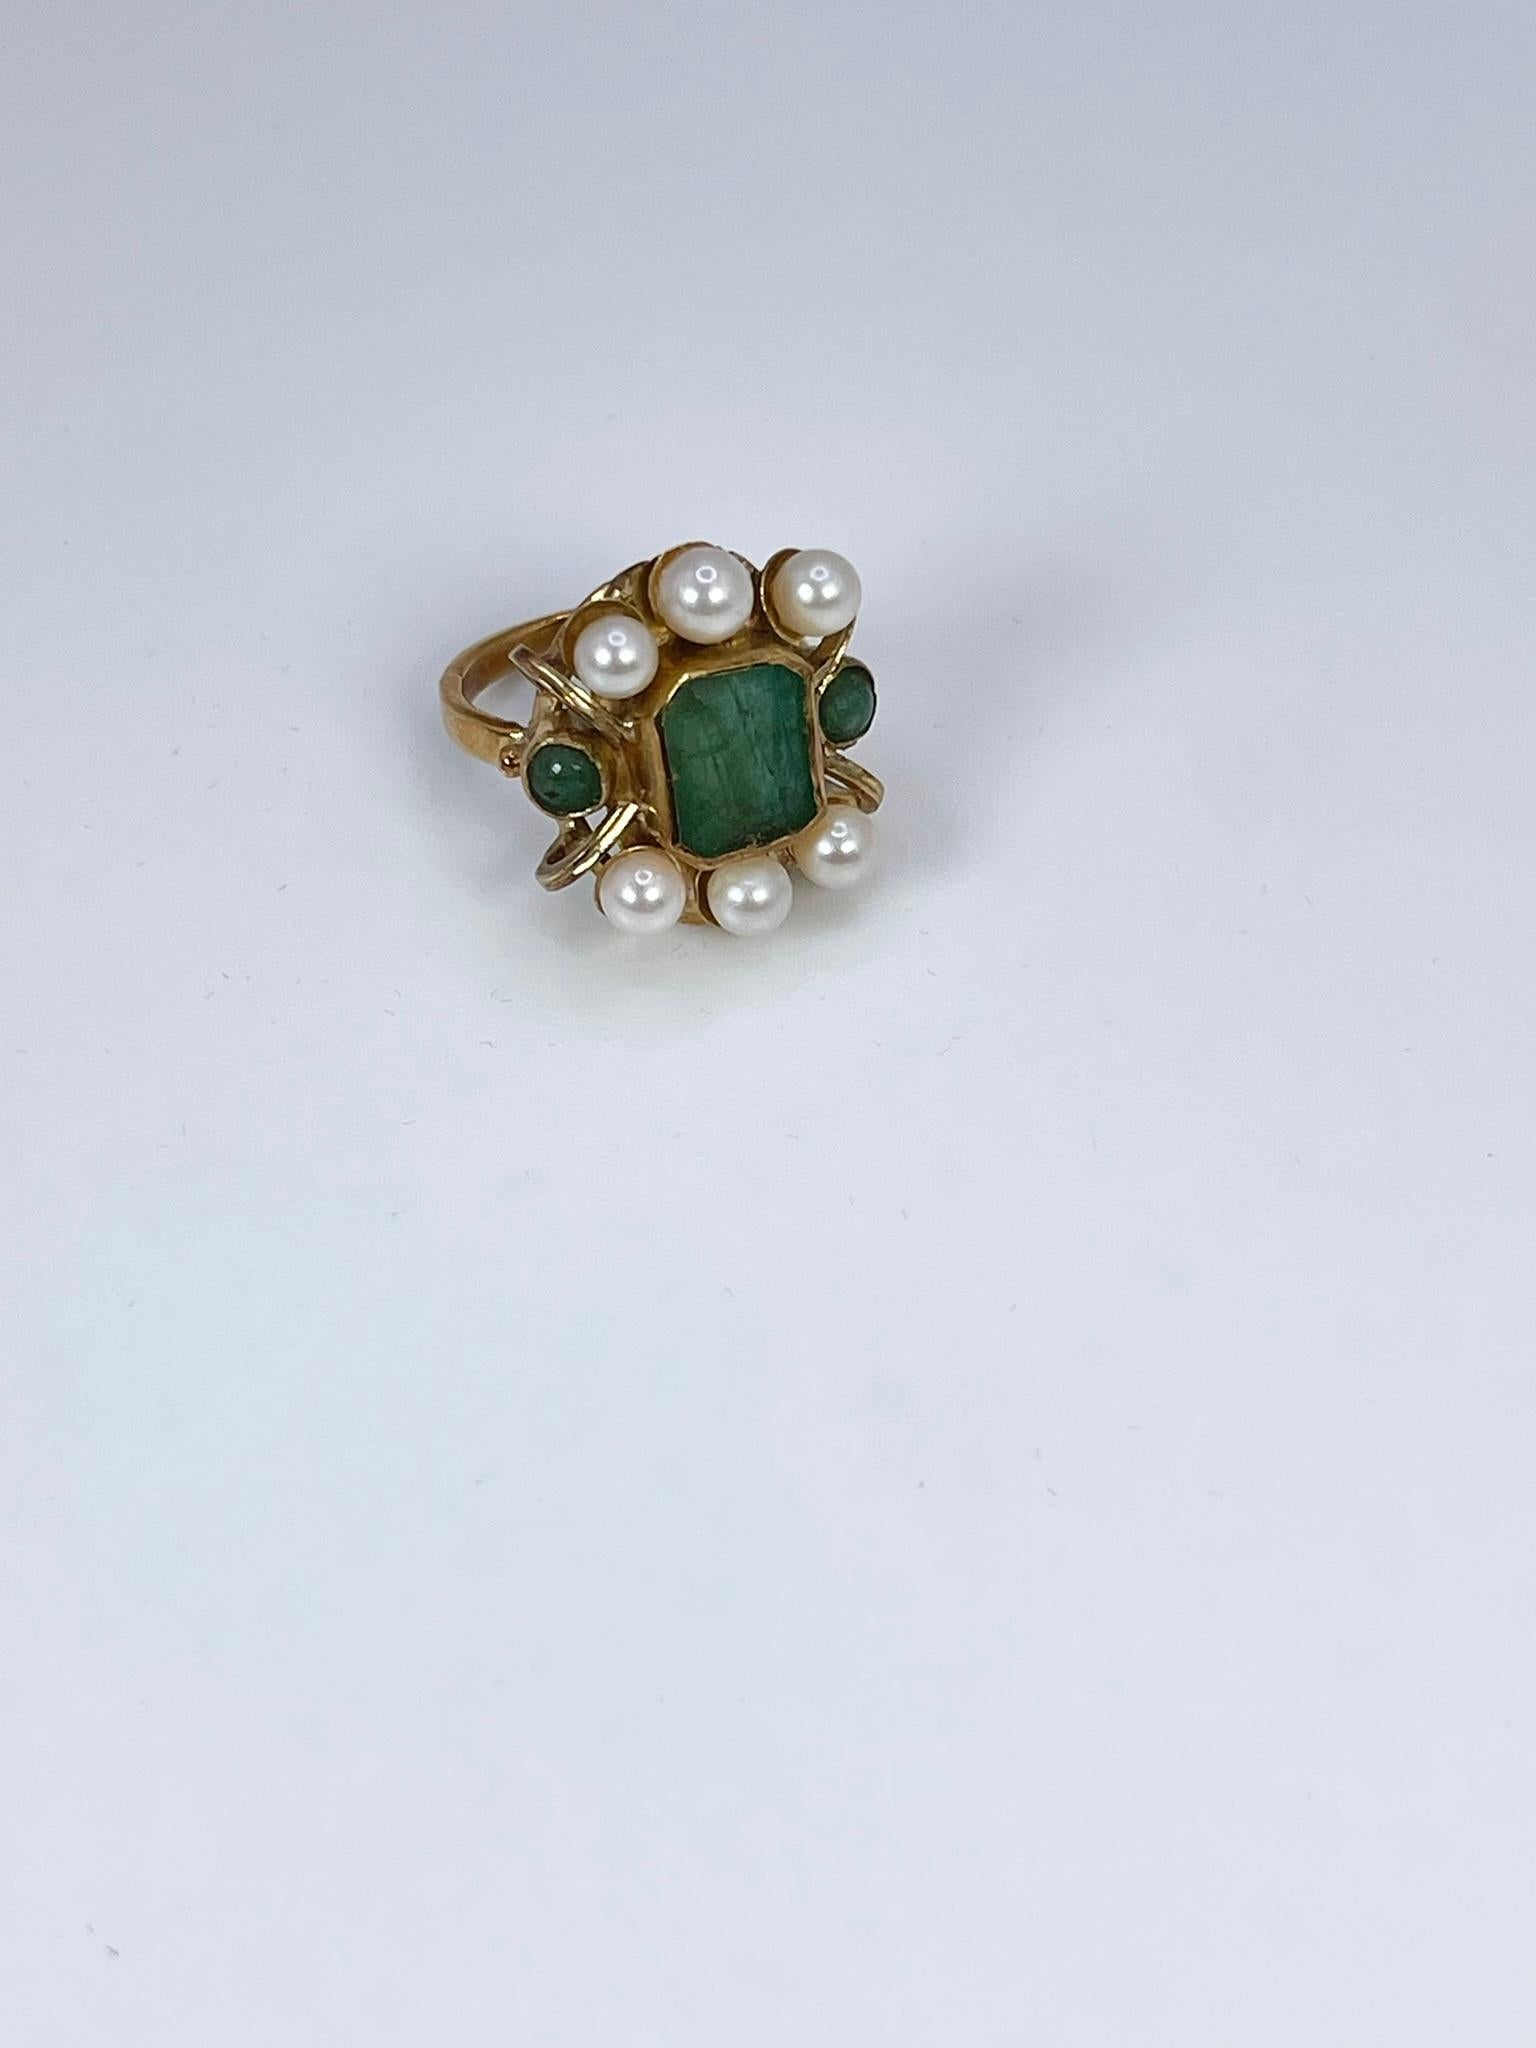 
Handmade cocktail ring made with natural emeralds and pearls in 14KT yellow gold.

GRAM WEIGHT: 6.52gr
GOLD: 14KT yellow gold
NATURAL EMERALD(S)
Clarity/Color: Heavily Included/Green
NATURAL PEARL(S)
Color/Clarity: White/Slightly Blemished
Size: